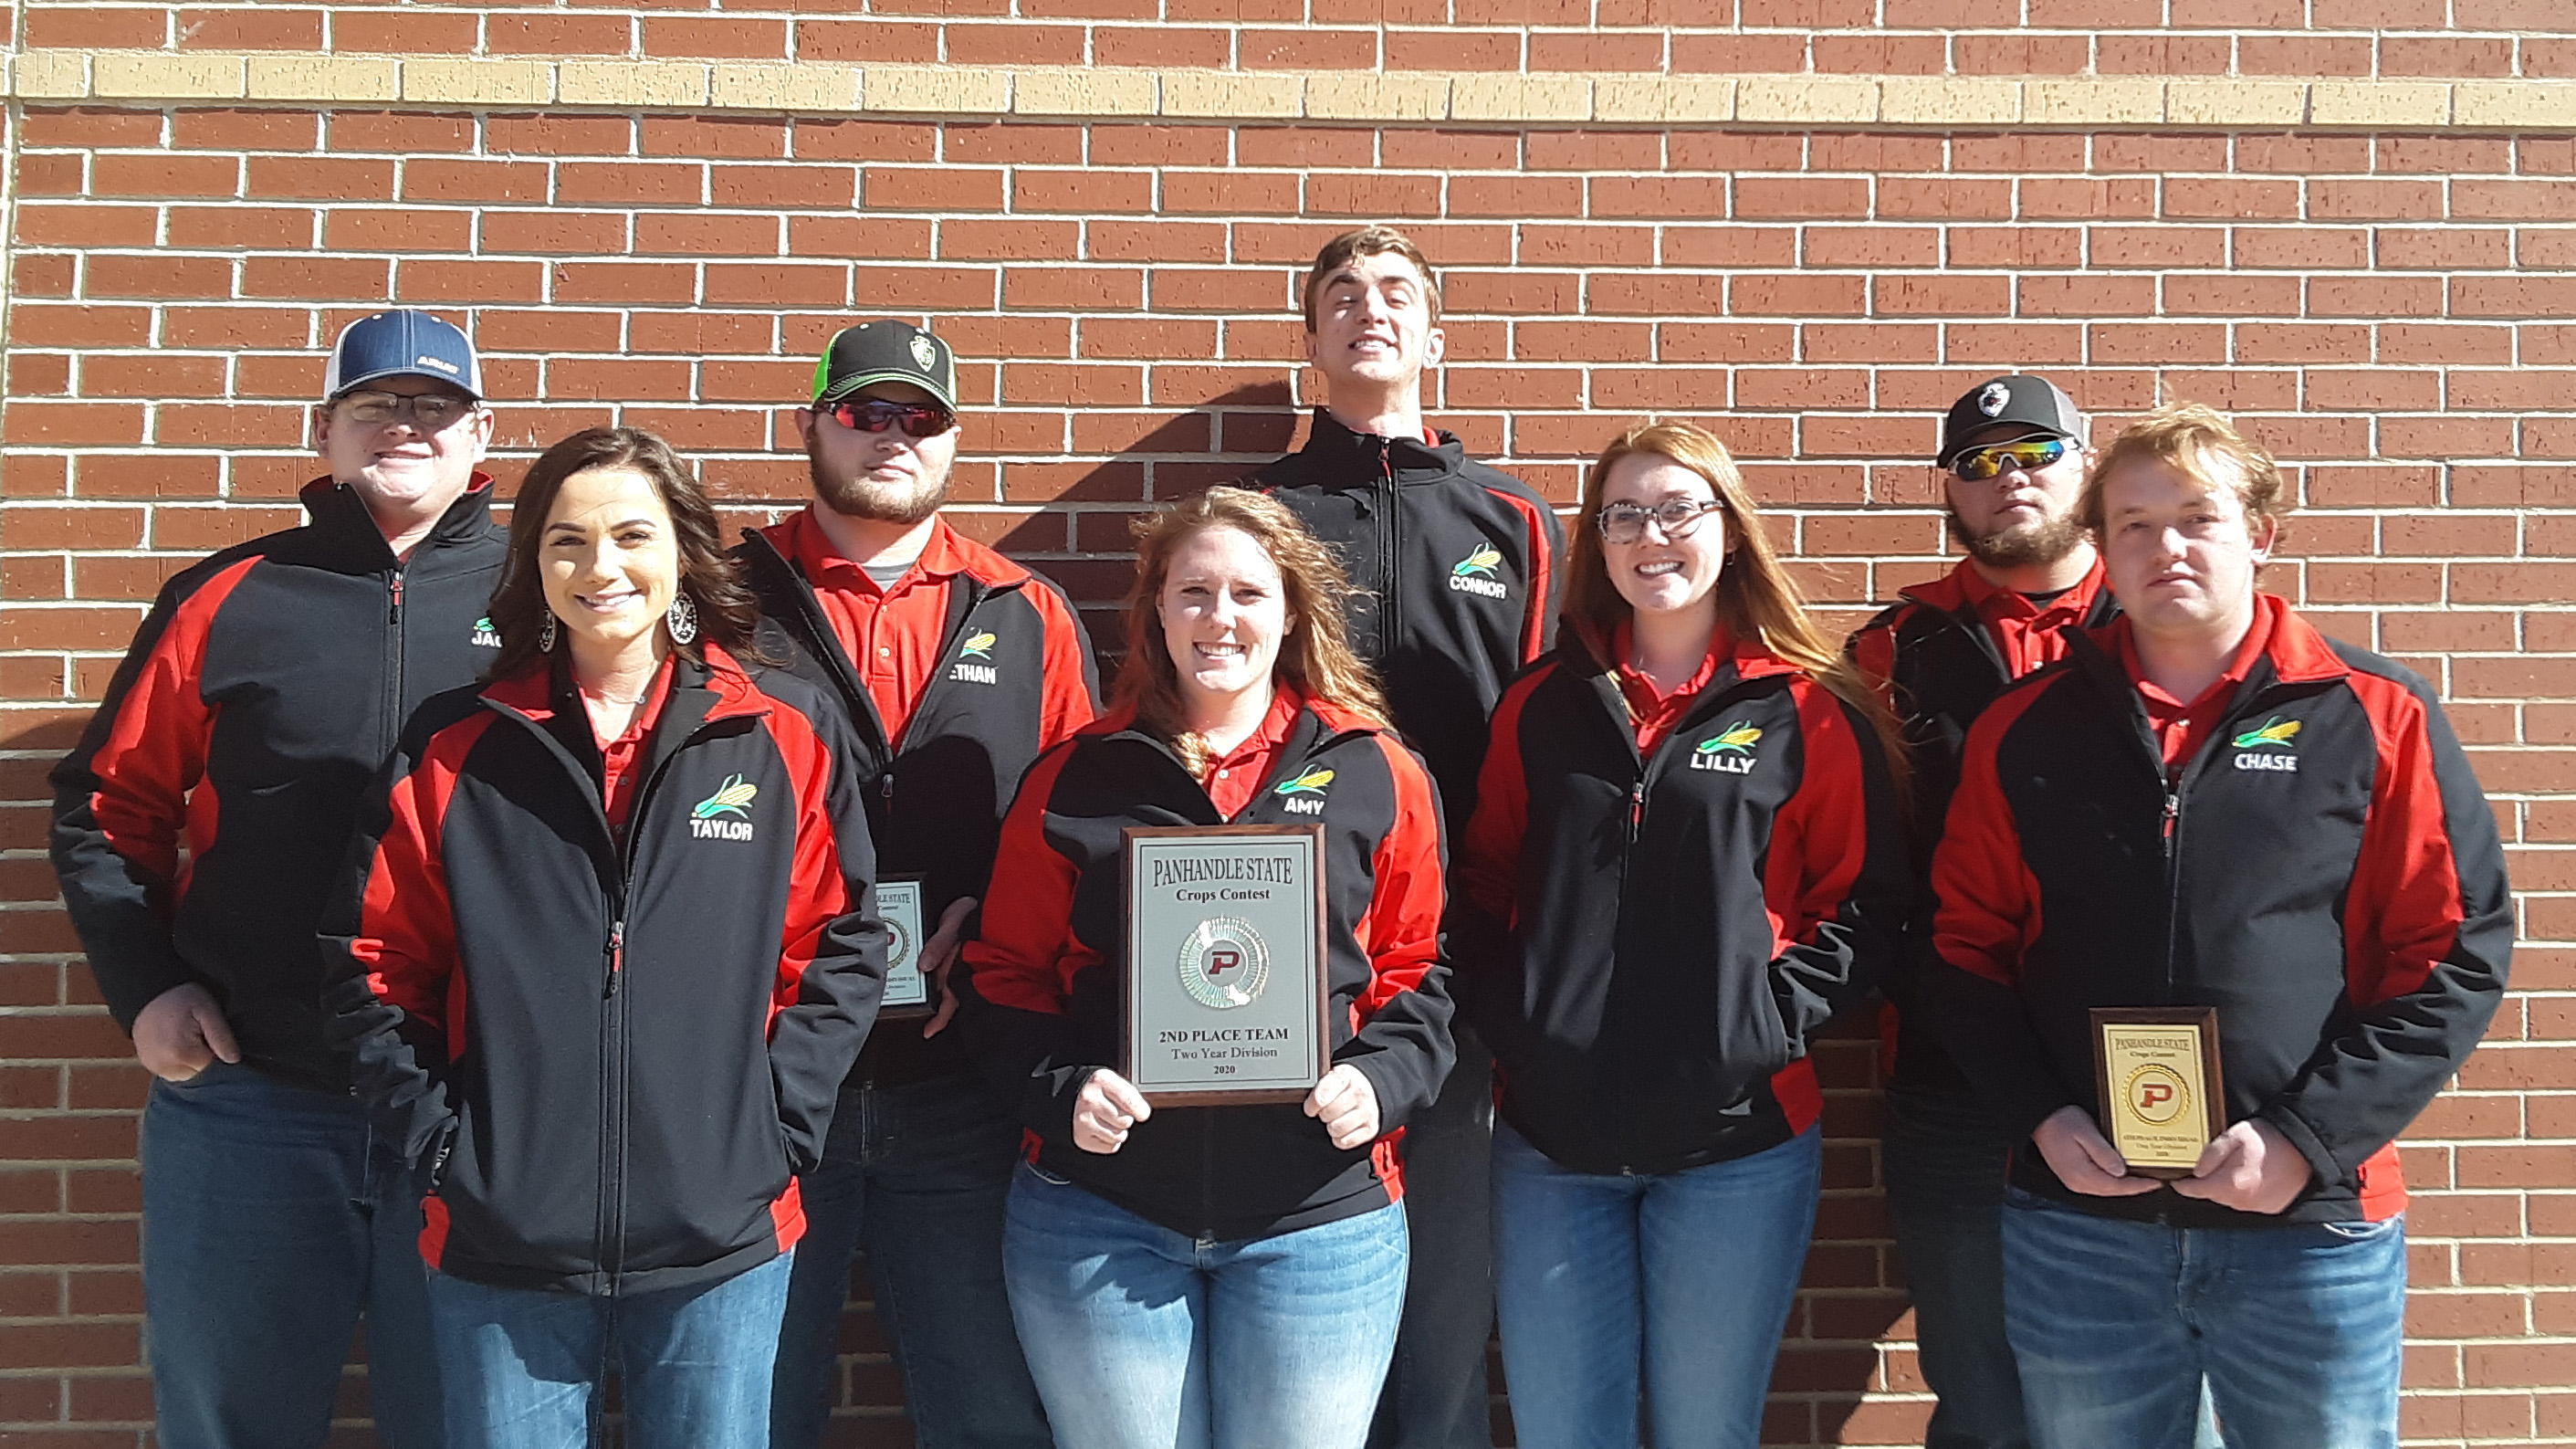 NCTA Crops Judging Team members for the 2020 season are, back row, from left, Jacob Jenkins, Mitchell; Ethan Aschenbrenner, Scottsbluff; Connor Nolan, Lynch; and Tyler Aschenbrenner, Scottsbluff. Front row, Taylor Sayer, Cambridge; Amy Lammers, Axtell; Lilly Calkins, Palmyra; and Chase Callahan, Farnam.  (Ramsdale / NCTA Photo)